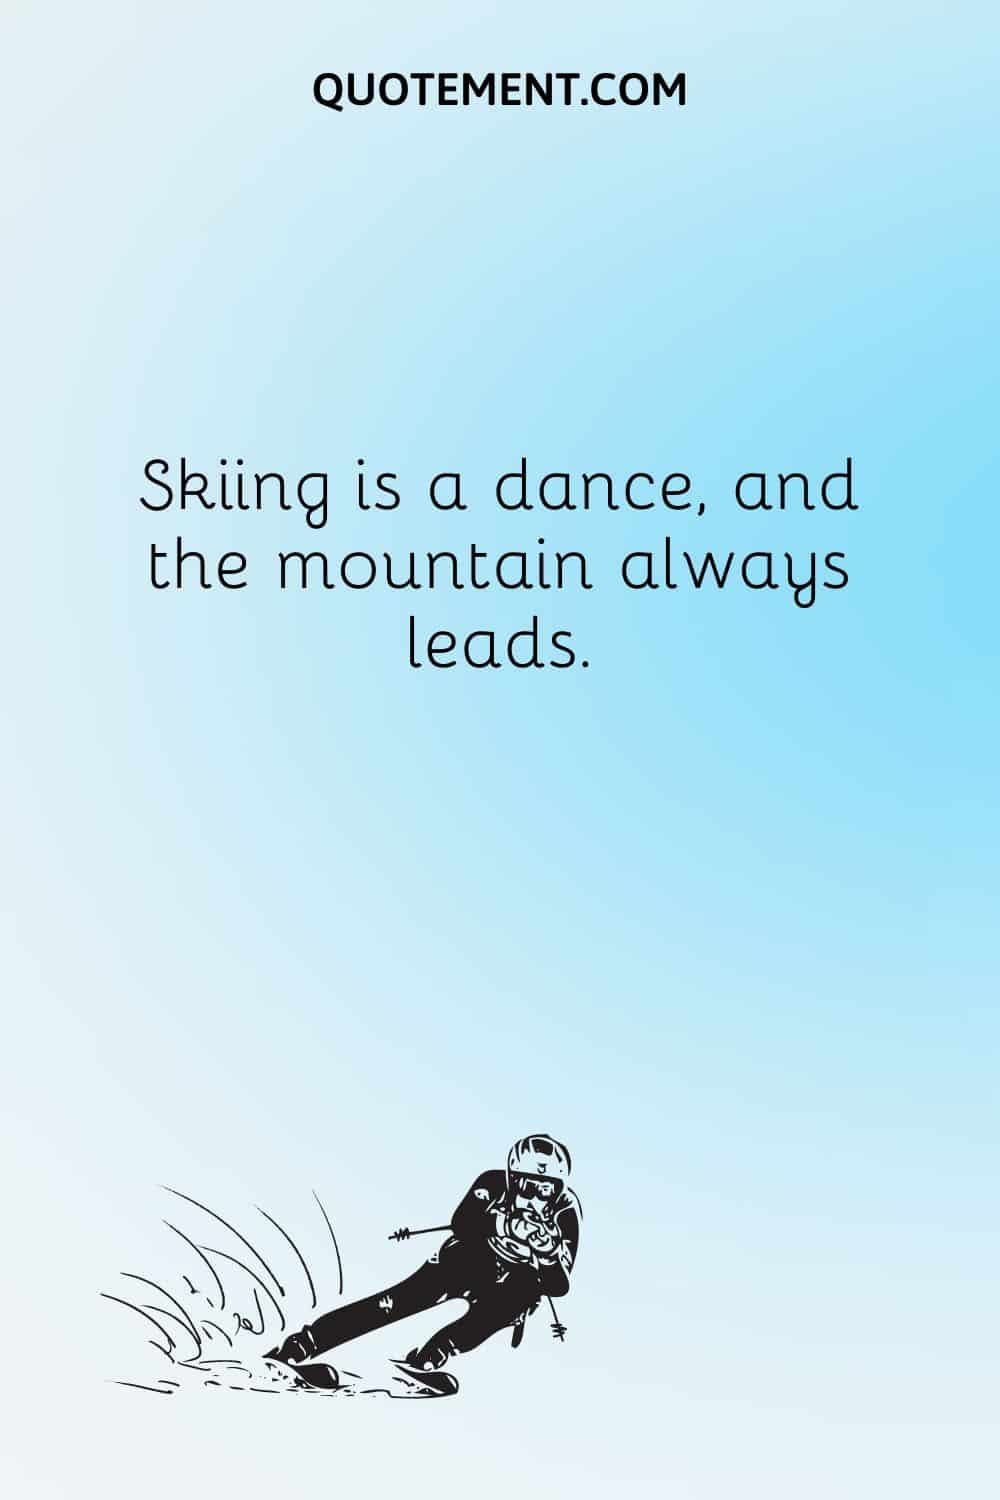 Skiing is a dance, and the mountain always leads.